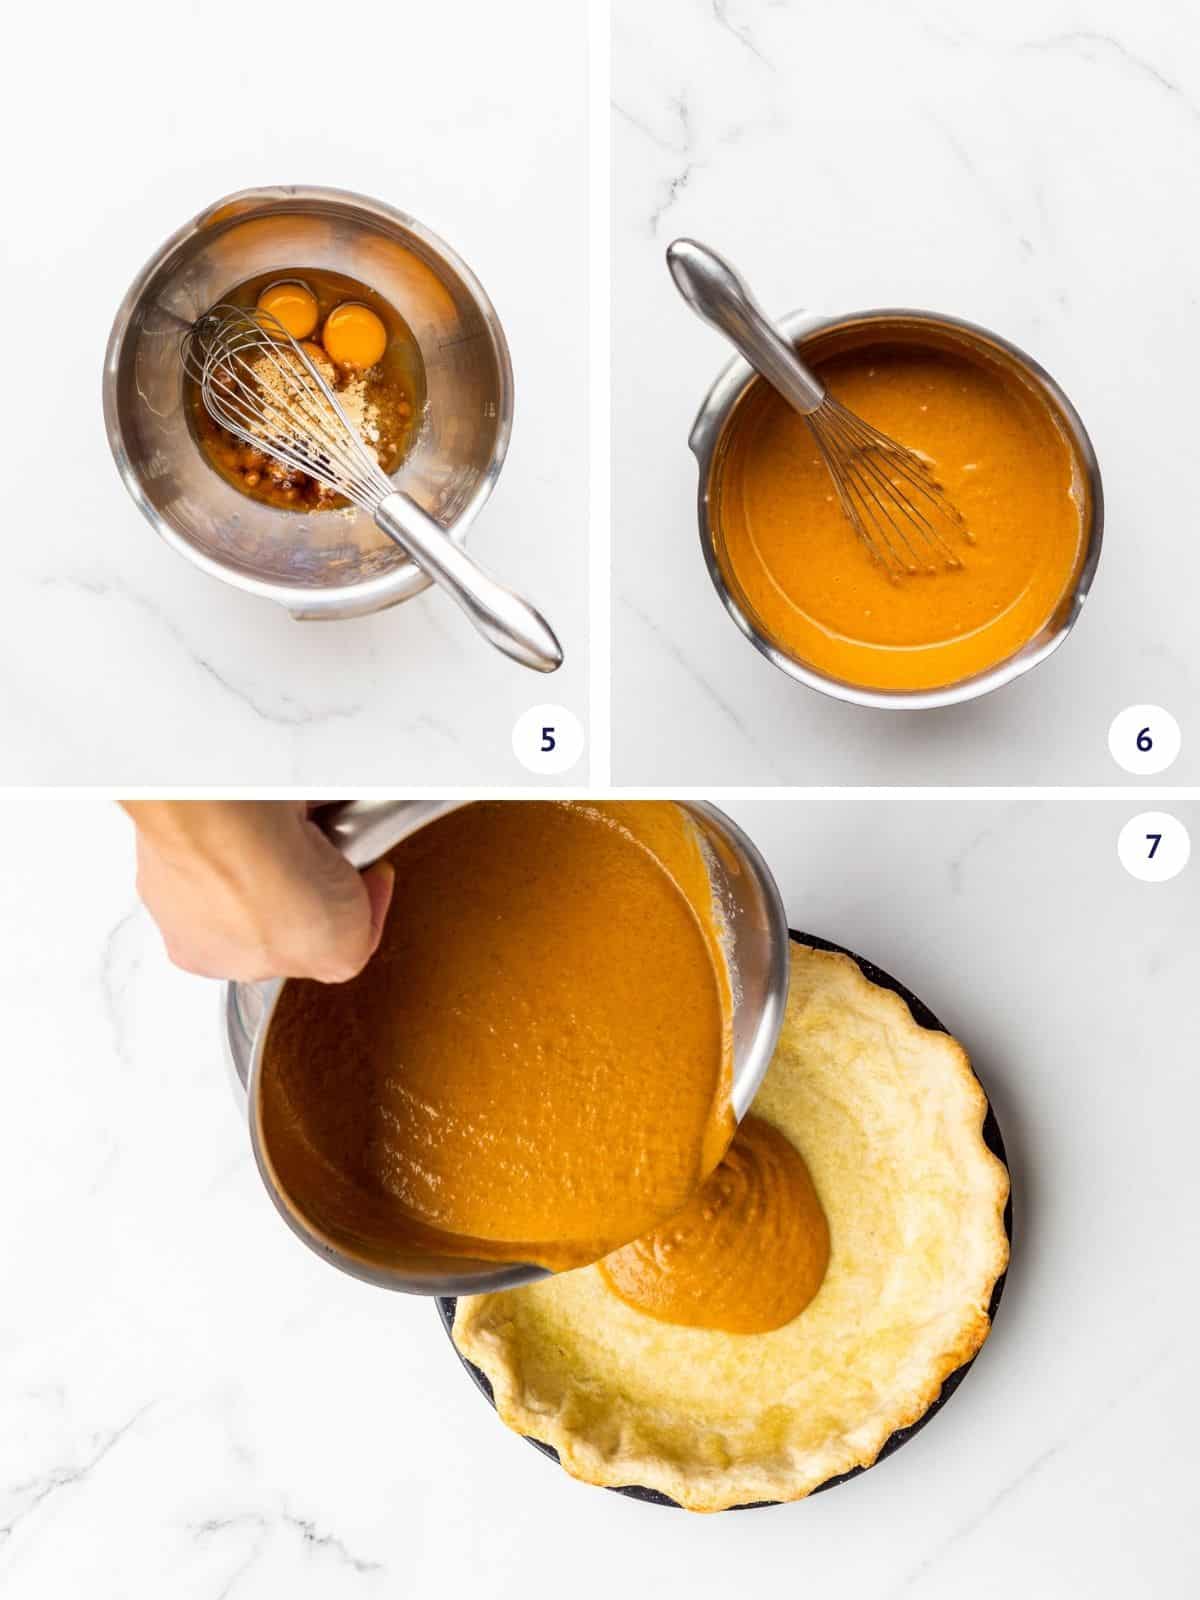 Whisking pumpkin pie filling and then pouring into a par-baked pie crust.